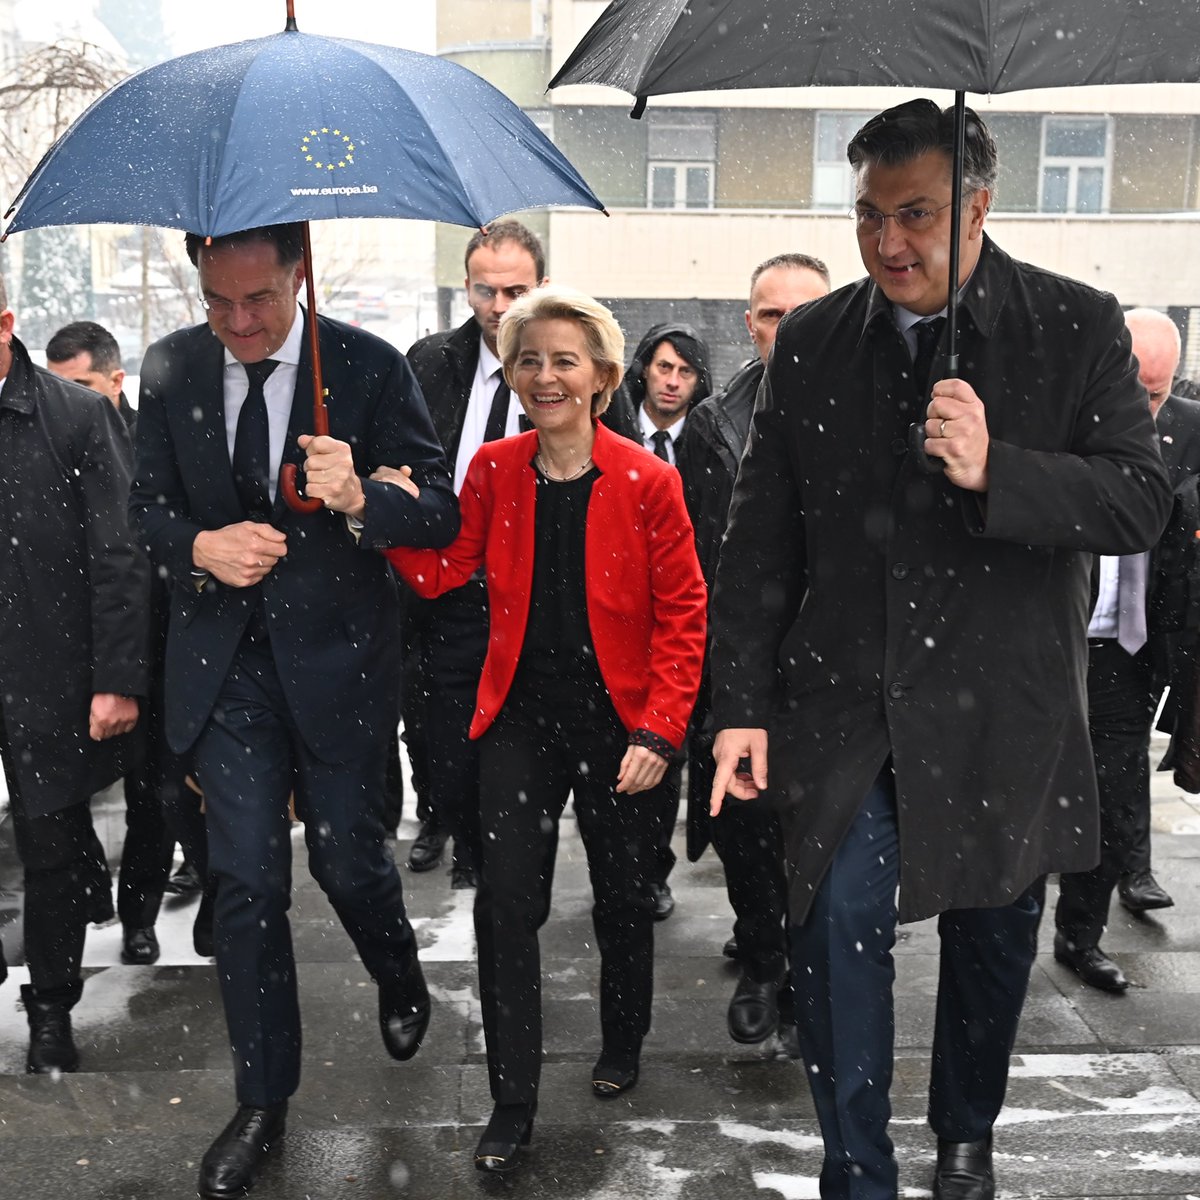 A pleasure to be back in Sarajevo, this time with @MinPres & @AndrejPlenkovic We are here to encourage BiH to make progress on its EU path. By delivering on the fundamentals. And moving forward as one. Because its future is in the EU, as a single, united and sovereign country.